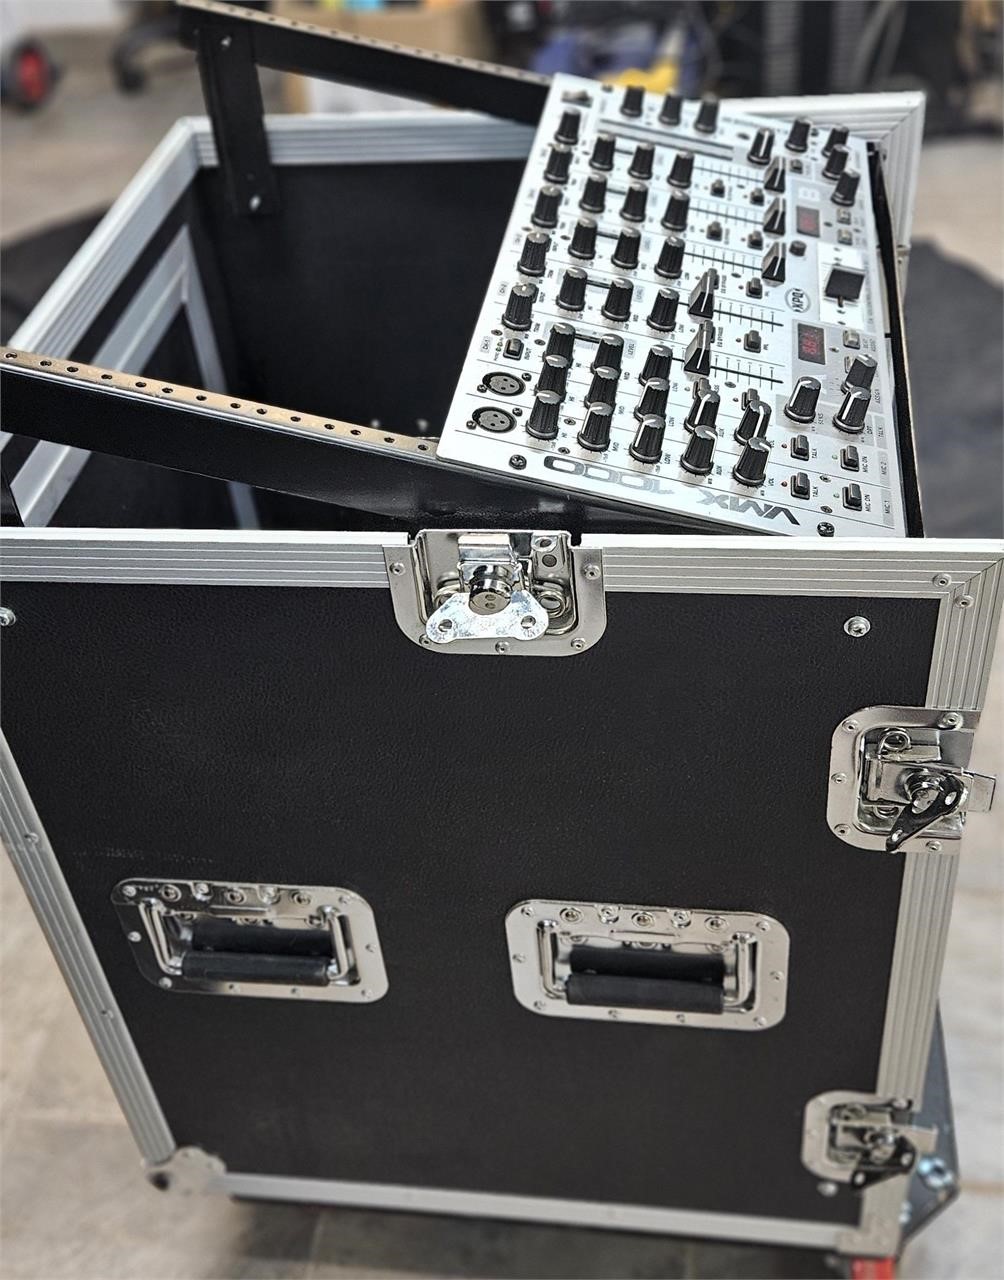 16 rack space road case with slanted rail on top